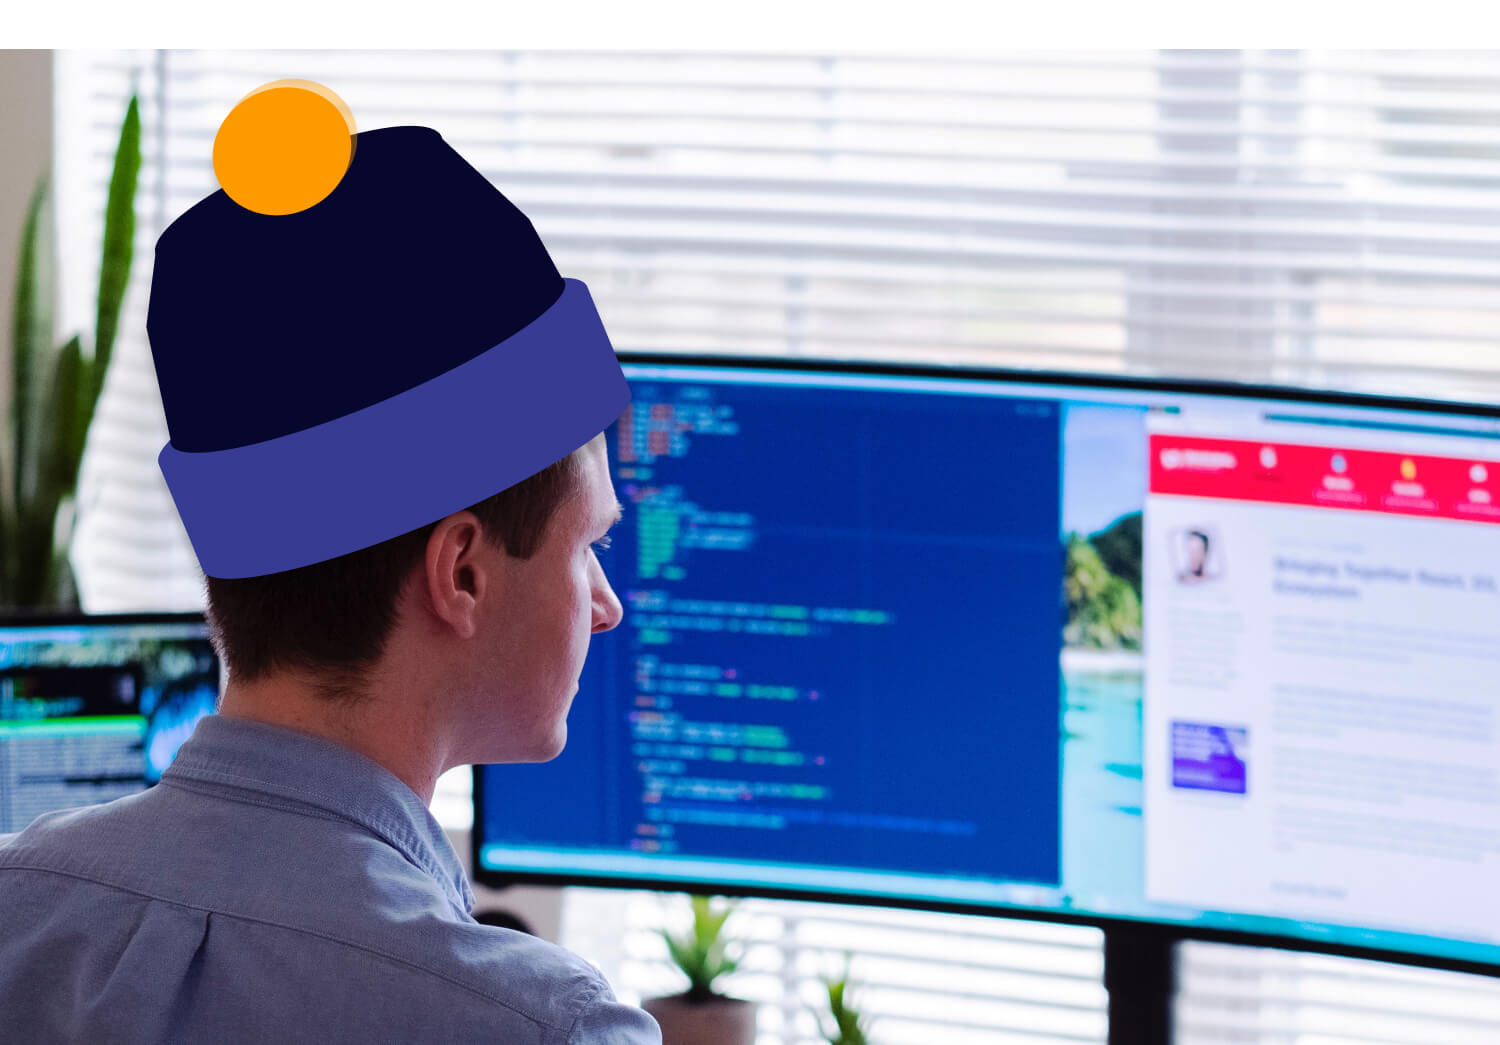 Guy-building-saas-while-wearing-a-cool-hat